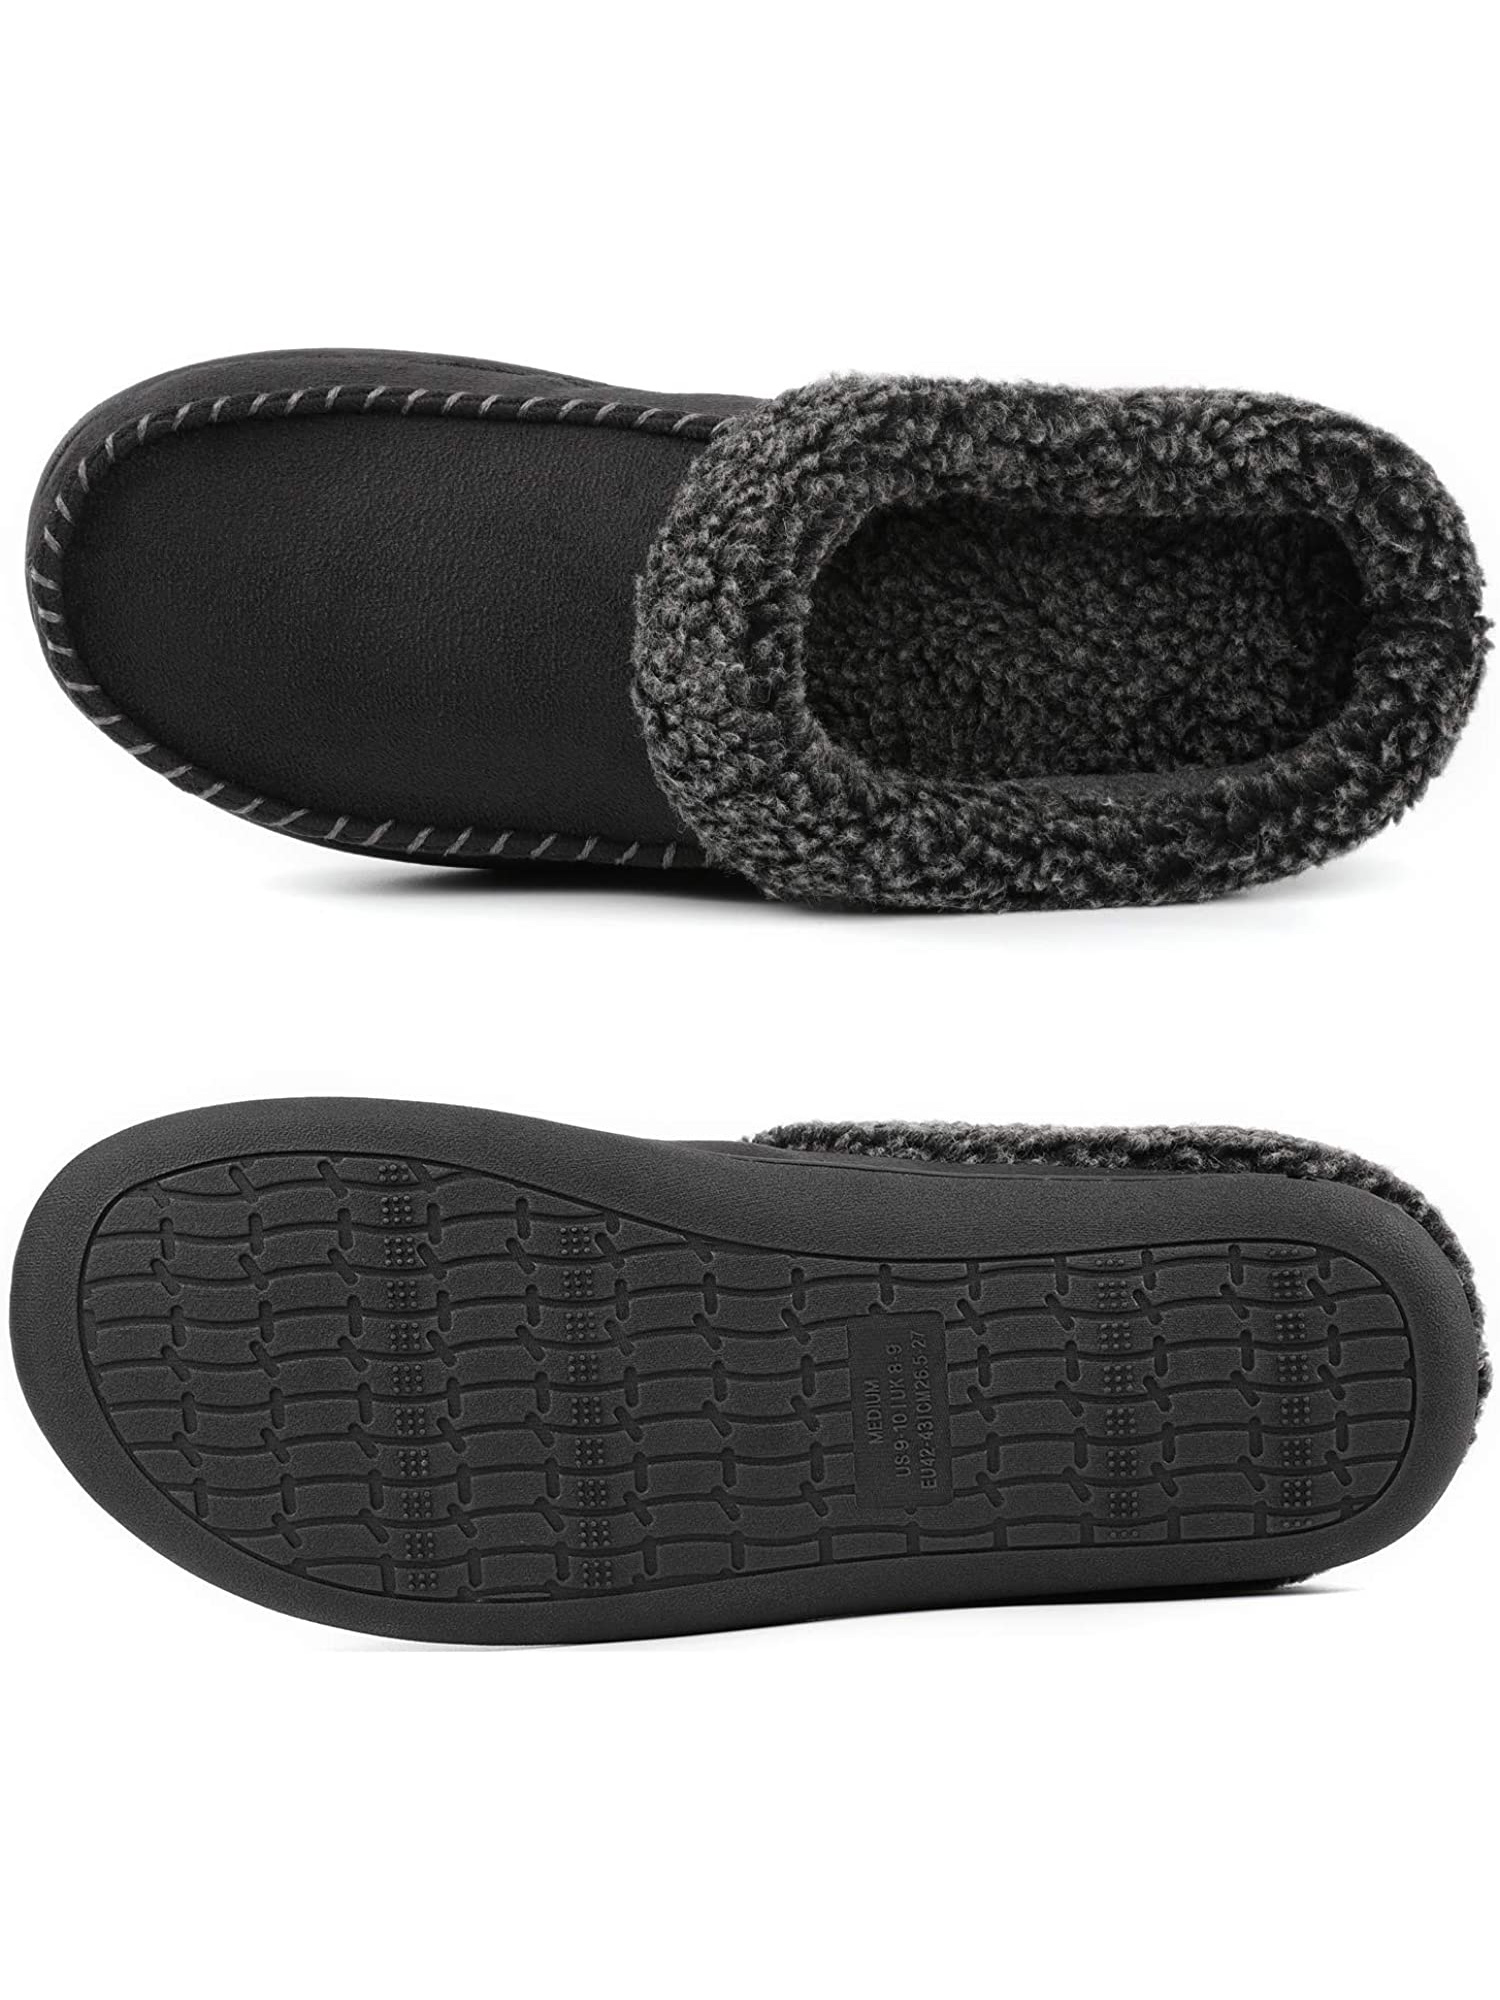 Men's Cozy Memory Foam Moccasin Suede Slippers with Fuzzy Plush Wool-Like Lining, Slip on Mules Clogs House Shoes with Indoor Outdoor Anti-Skid Rubber Sole - image 5 of 6